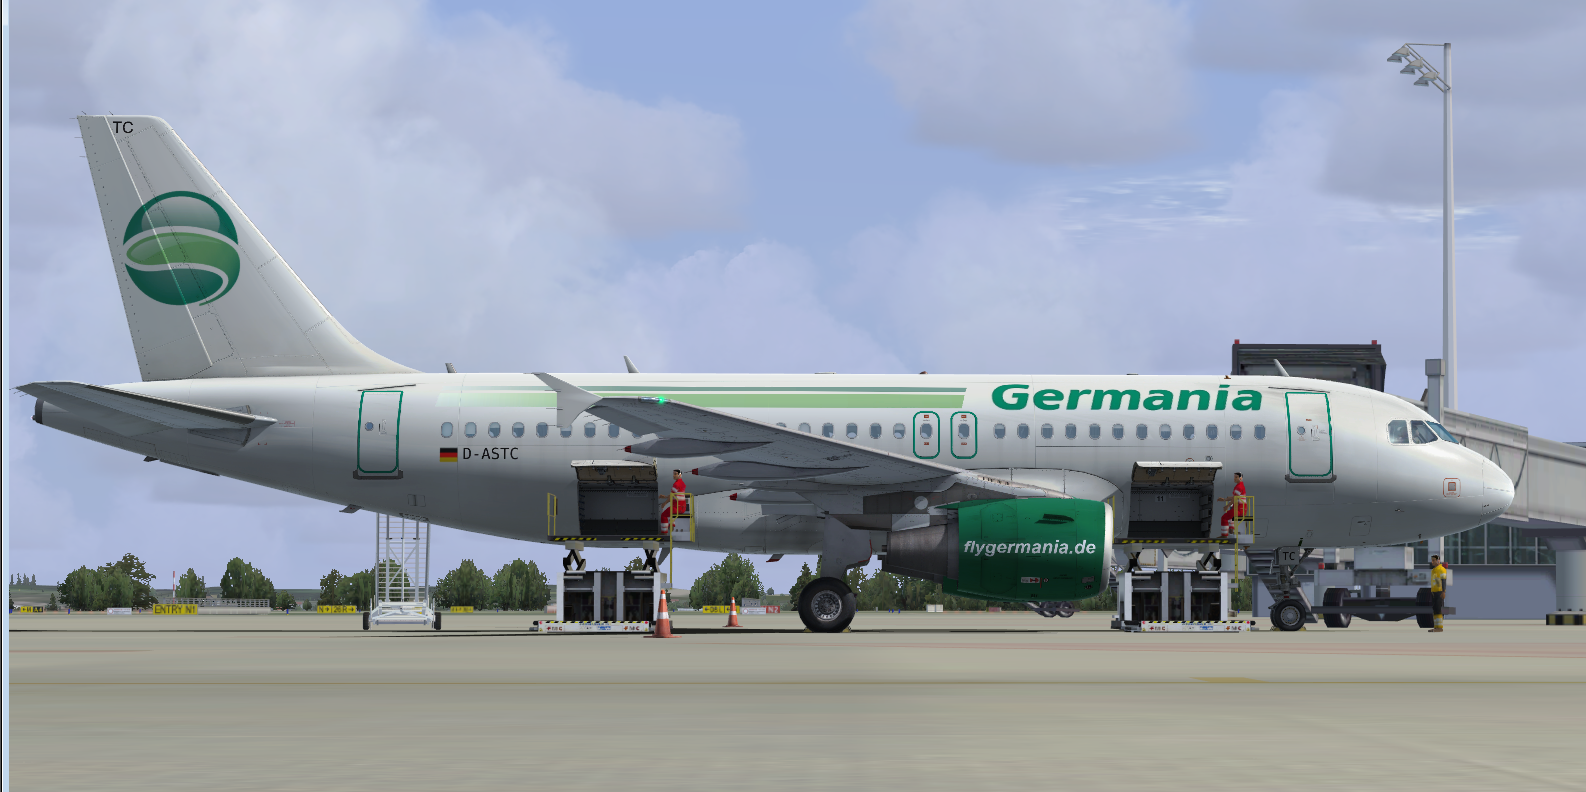 More information about "A319 CFM Germania D-ASTC"